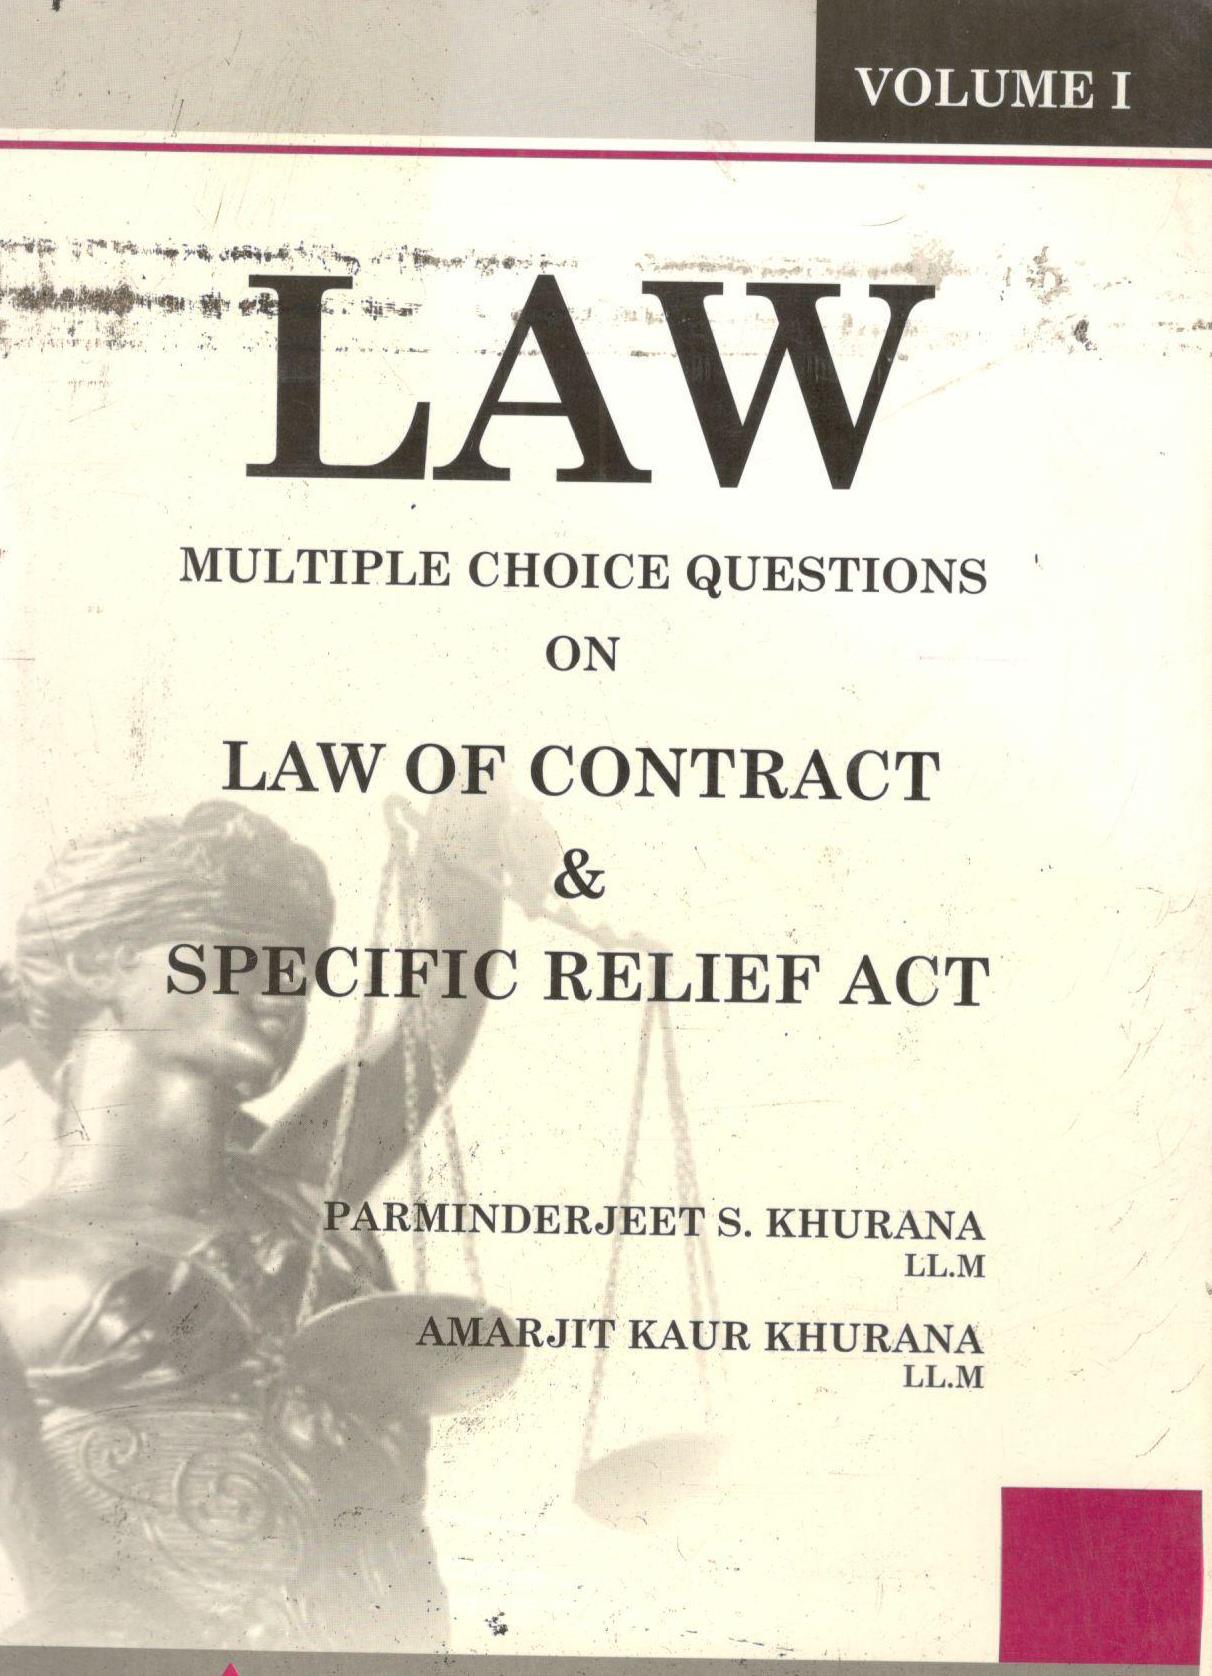 2003 Law of Contract Vol. I